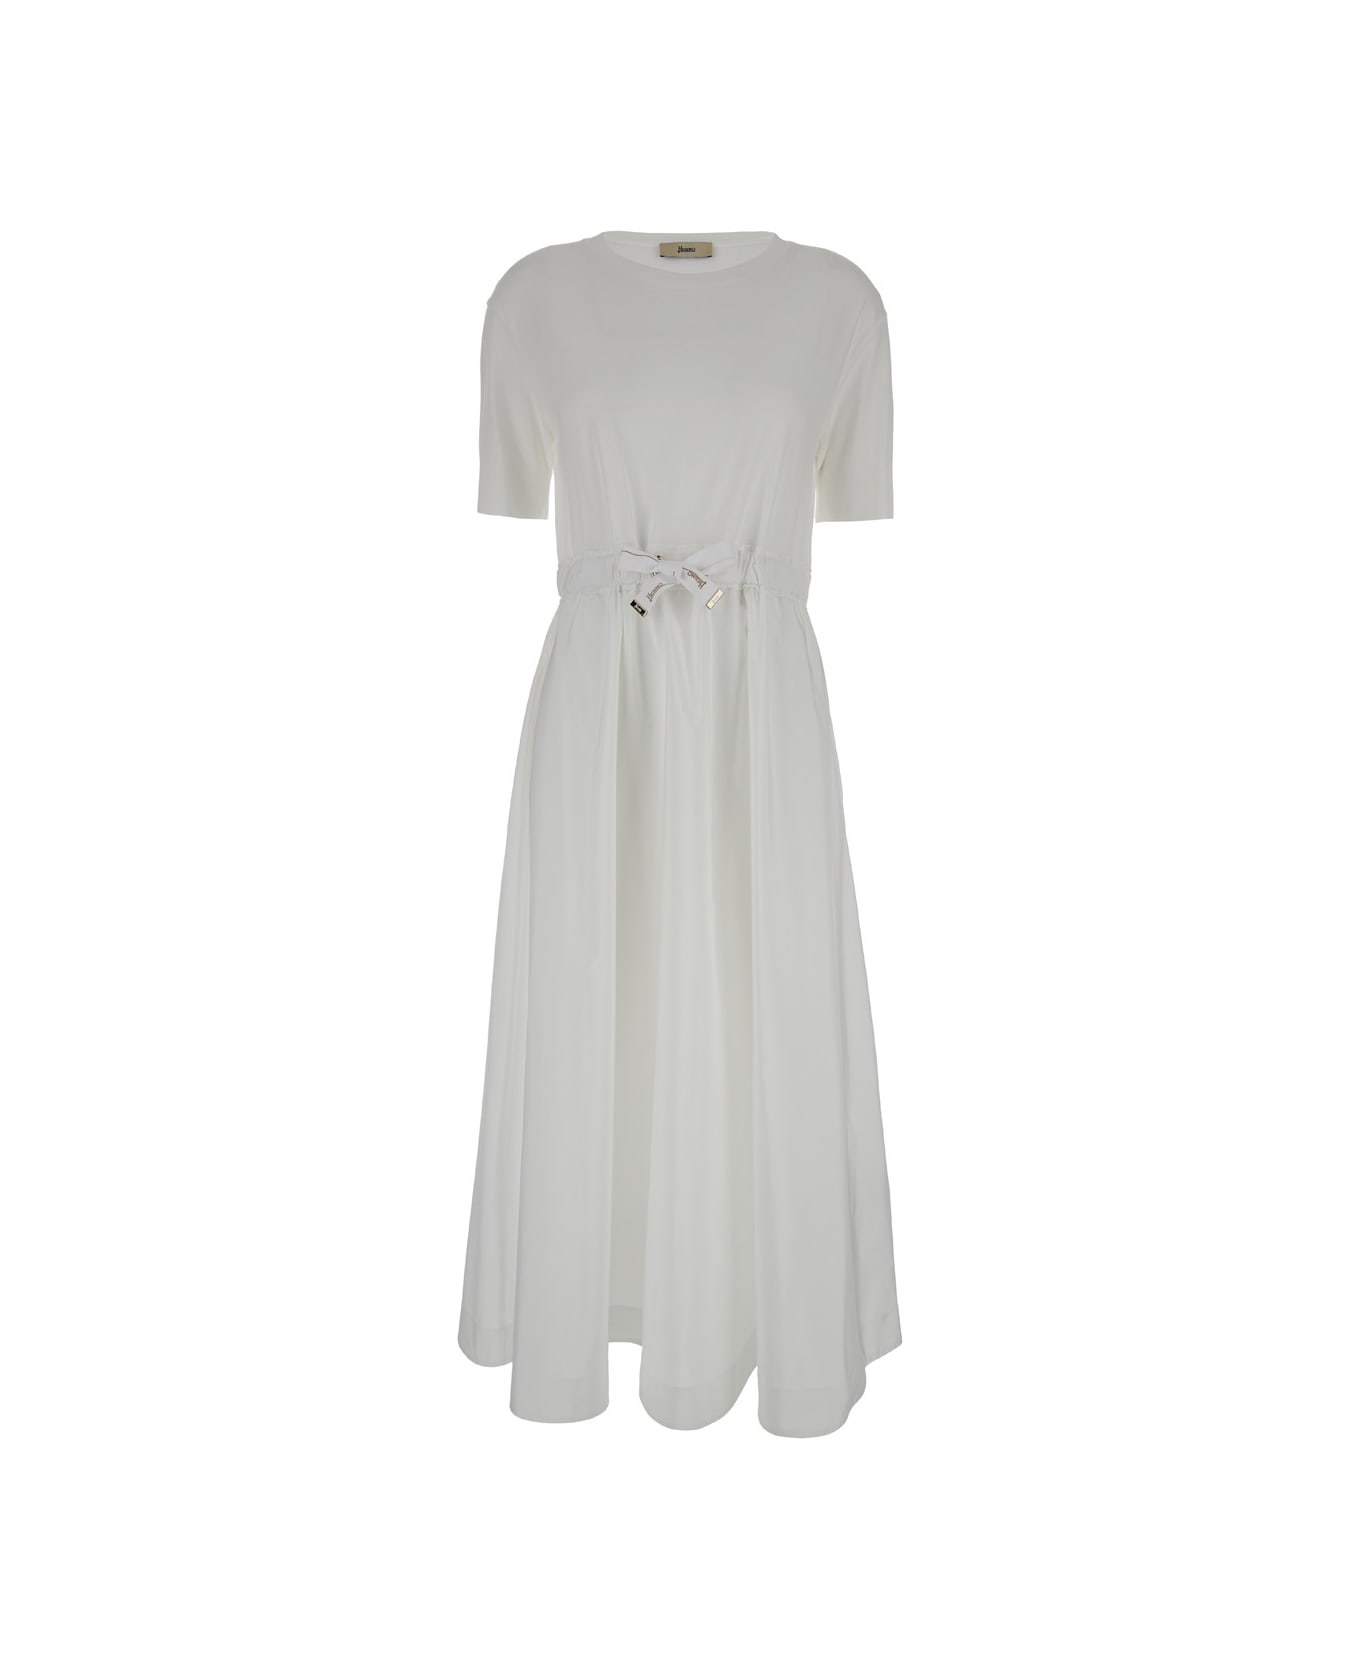 Herno Long White Dress With Branded Drawstring In Cotton Blend Woman - White